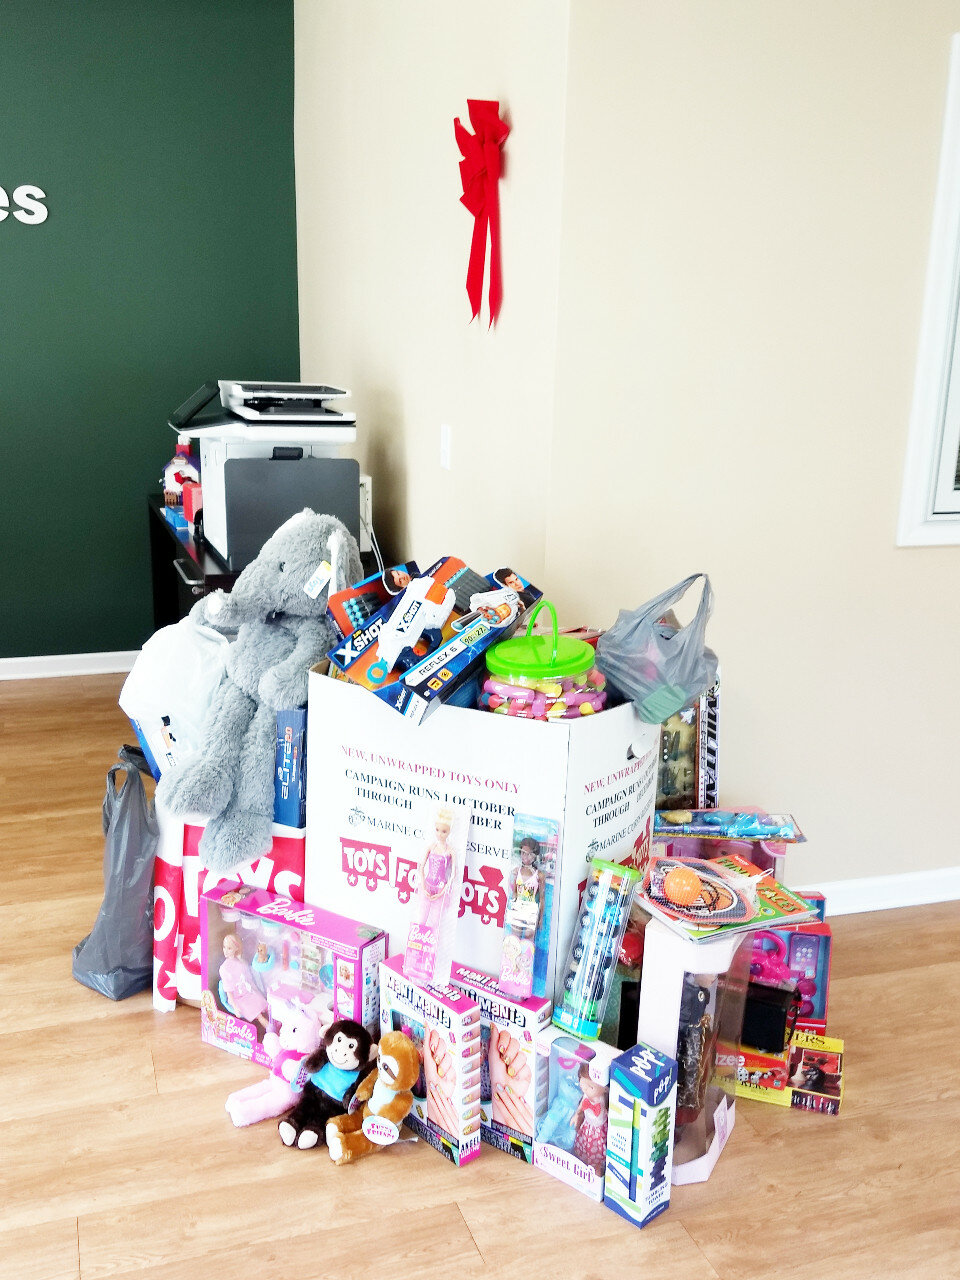 "On behalf of Edward Jones, Office of Anthony Rowley, we sincerely thank everyone that donated to Toys for Tots."